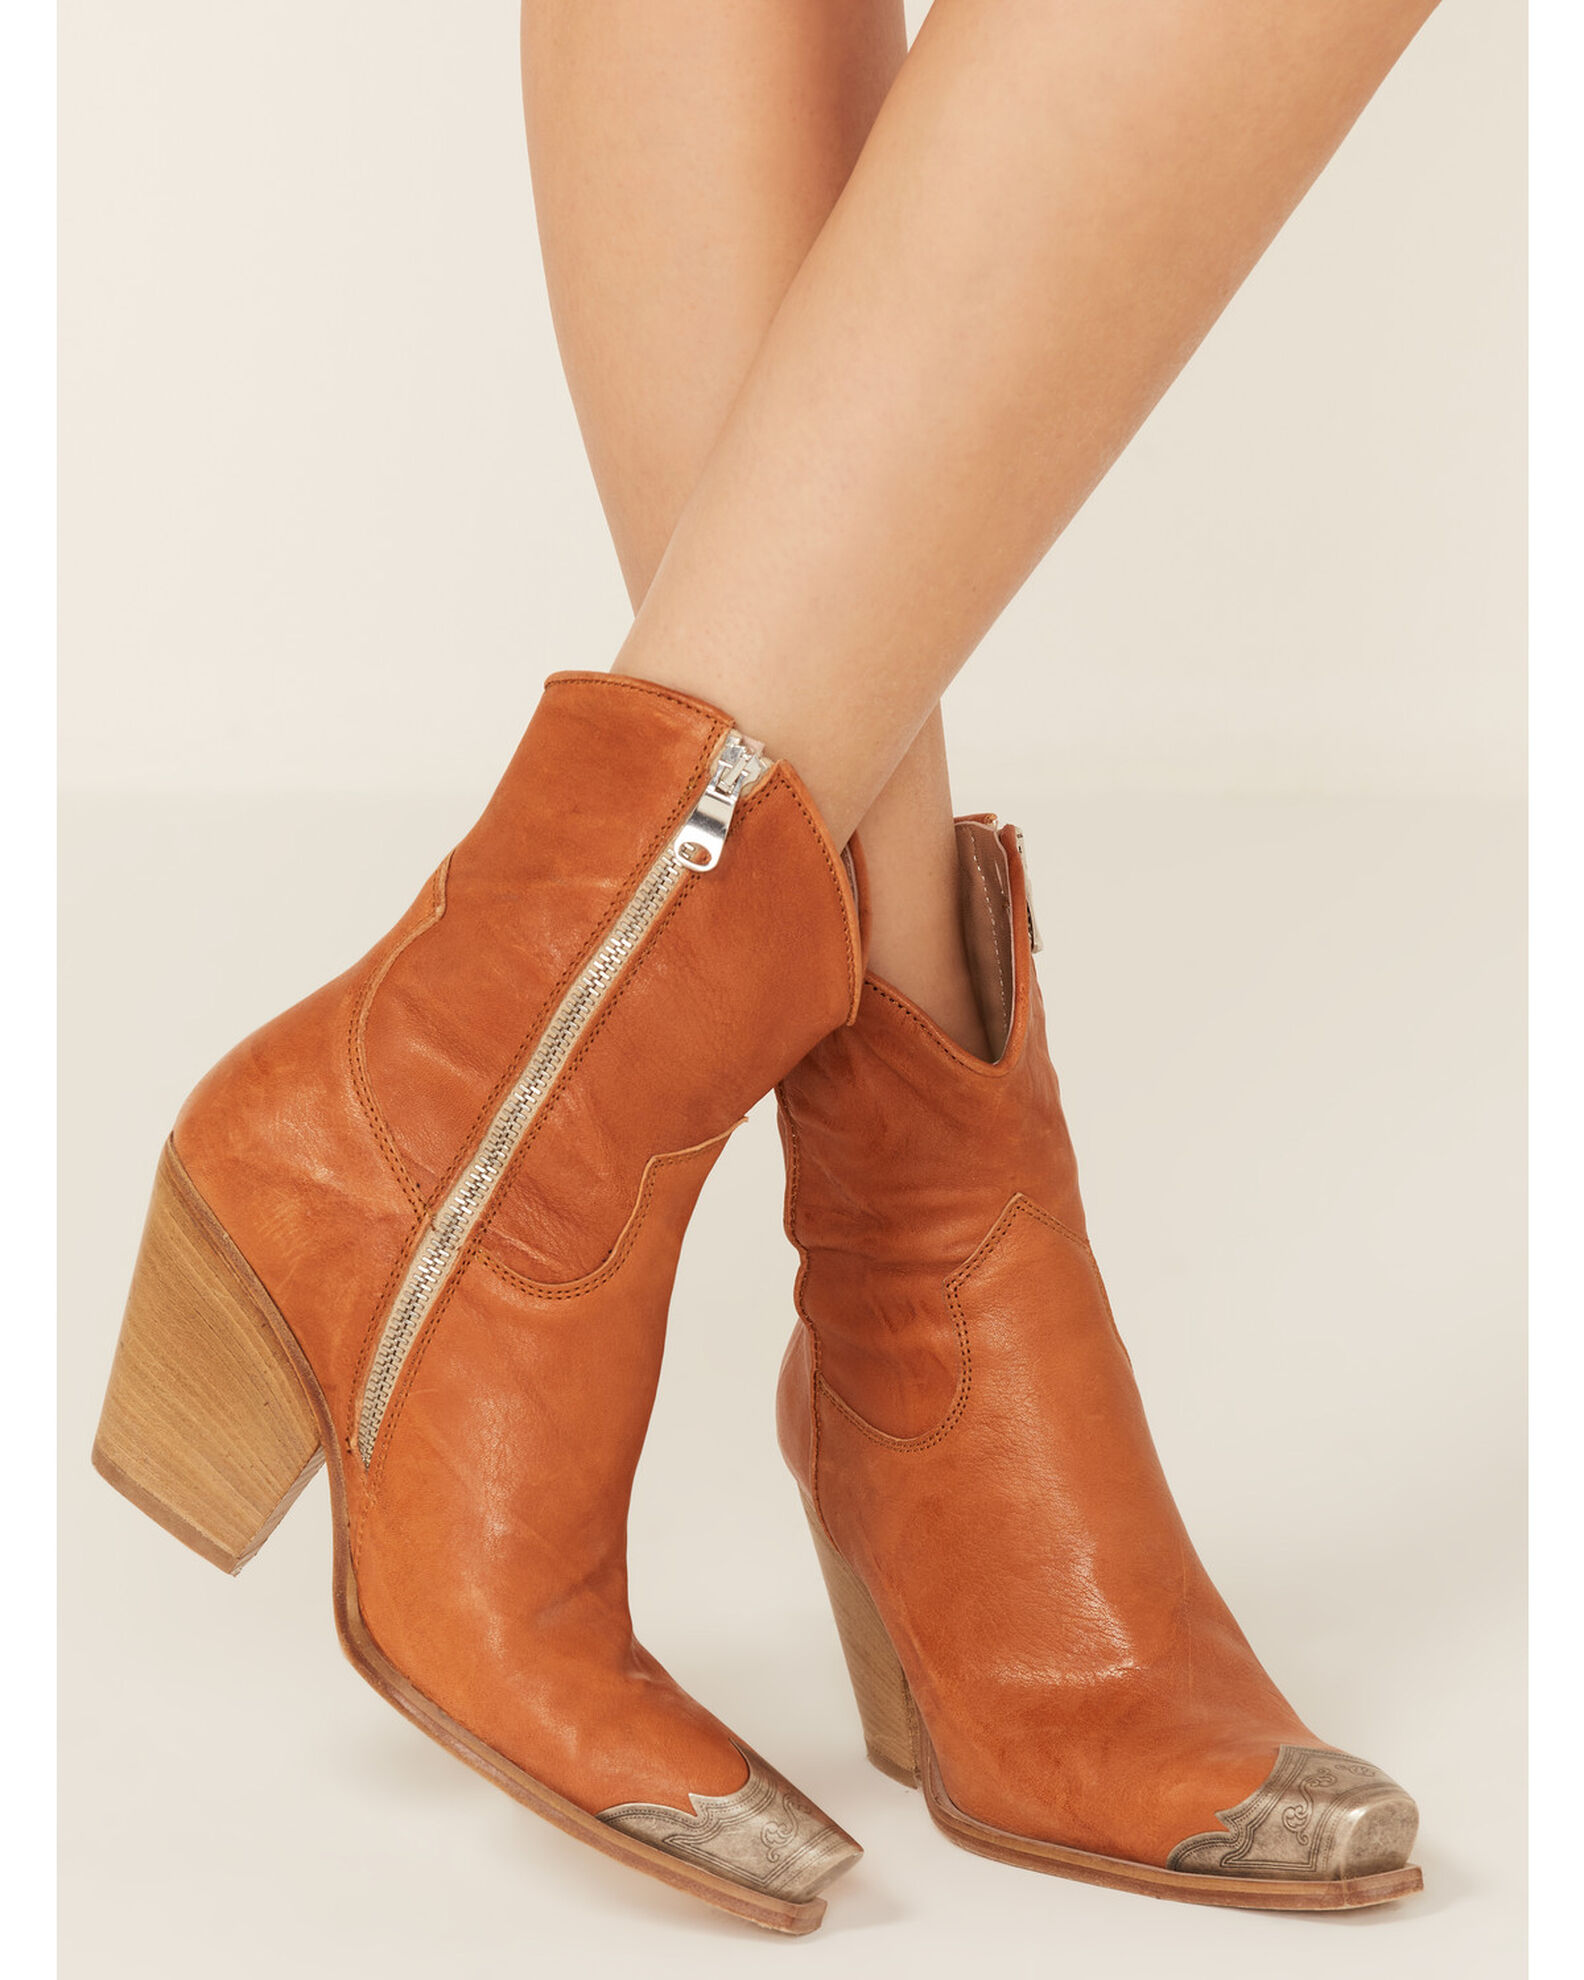 Product Name: Free People Women's Brayden Fashion Booties - Snip Toe